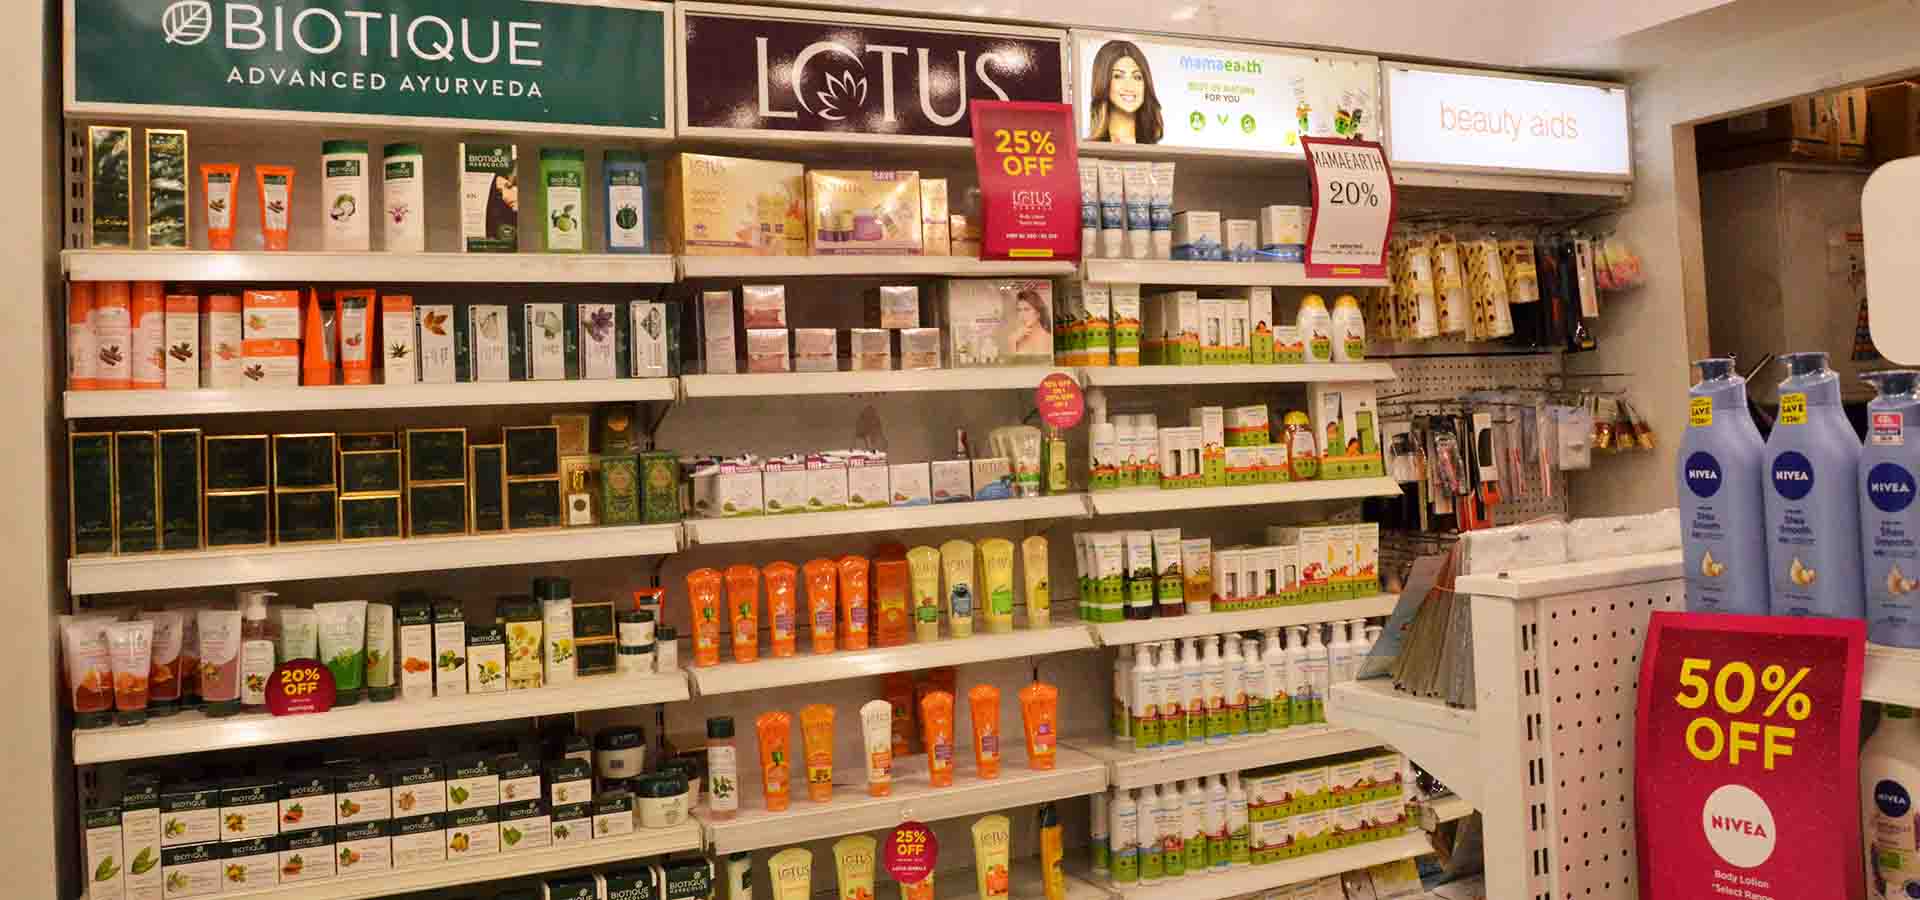 Health & Glow store photos in mall